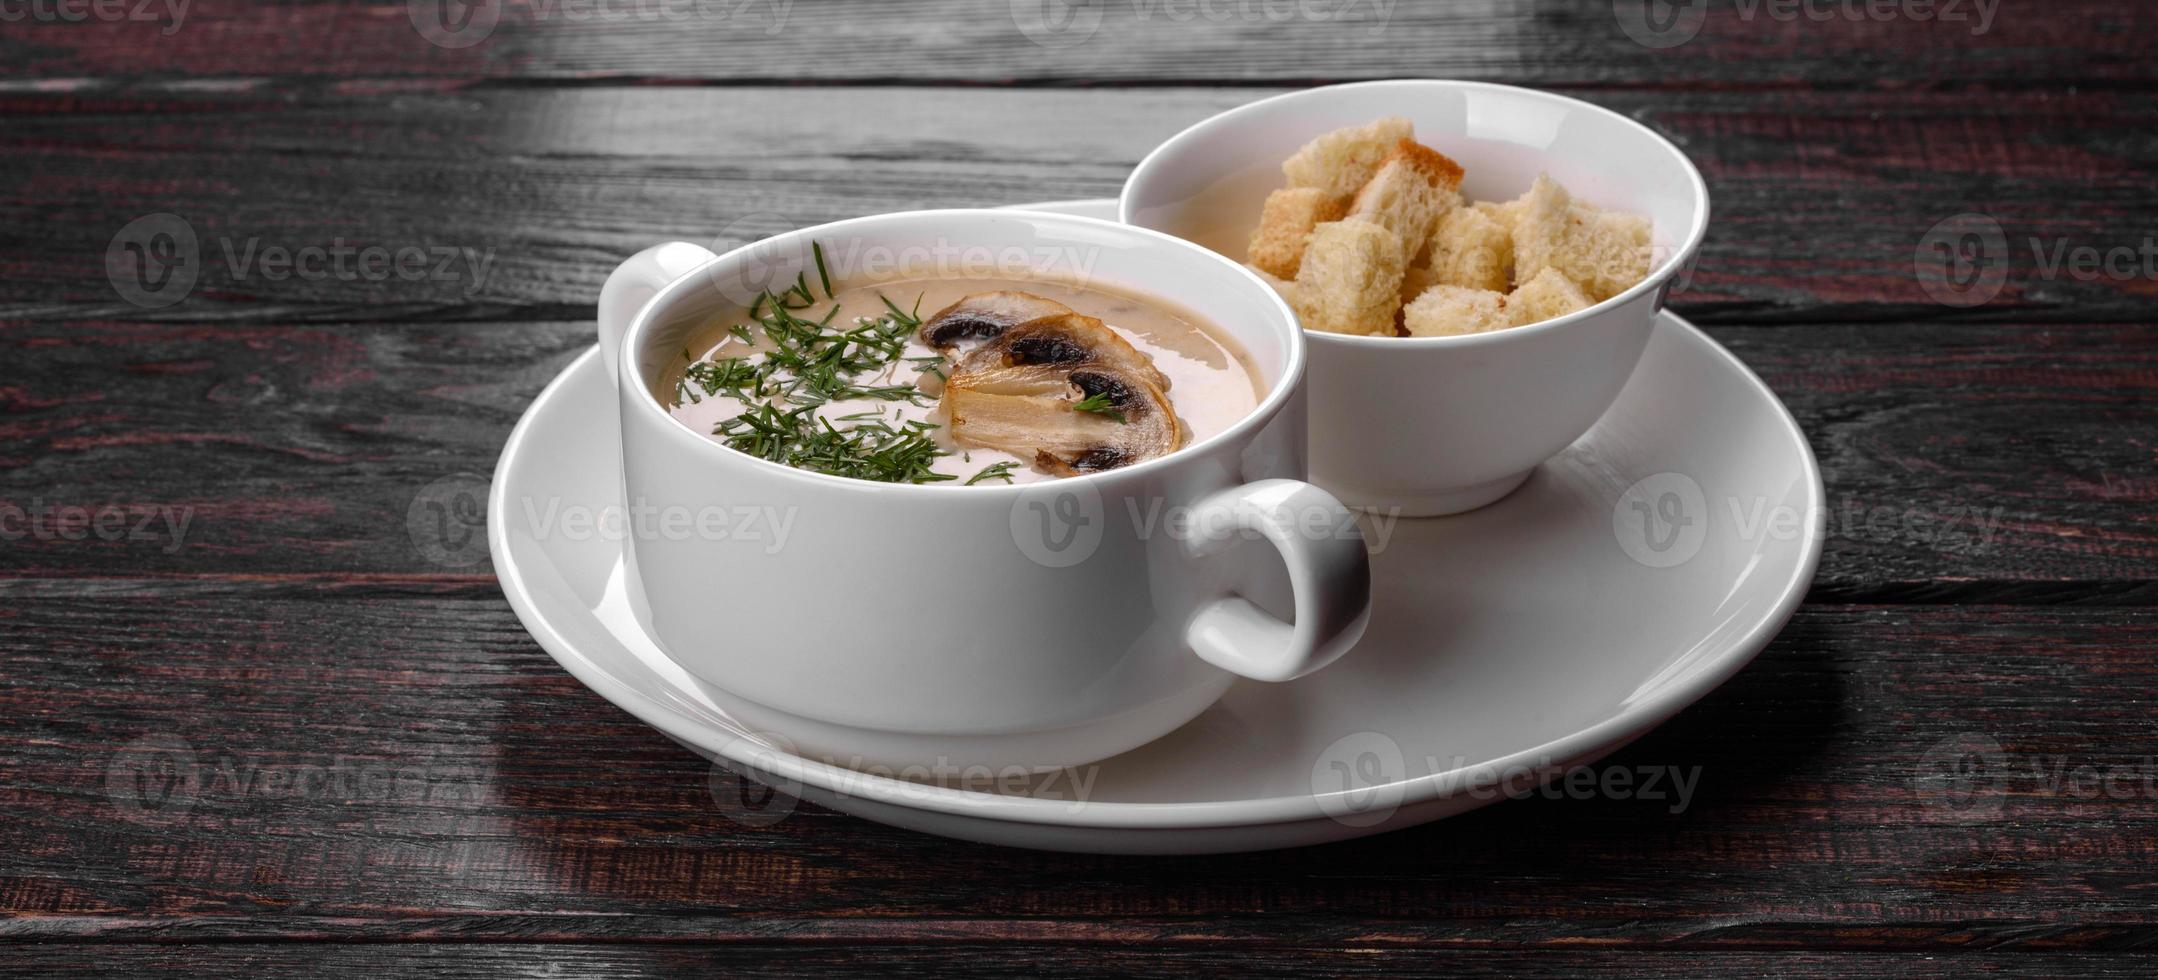 Cream of mushroom soup. Home-made with whole and sliced mushrooms photo